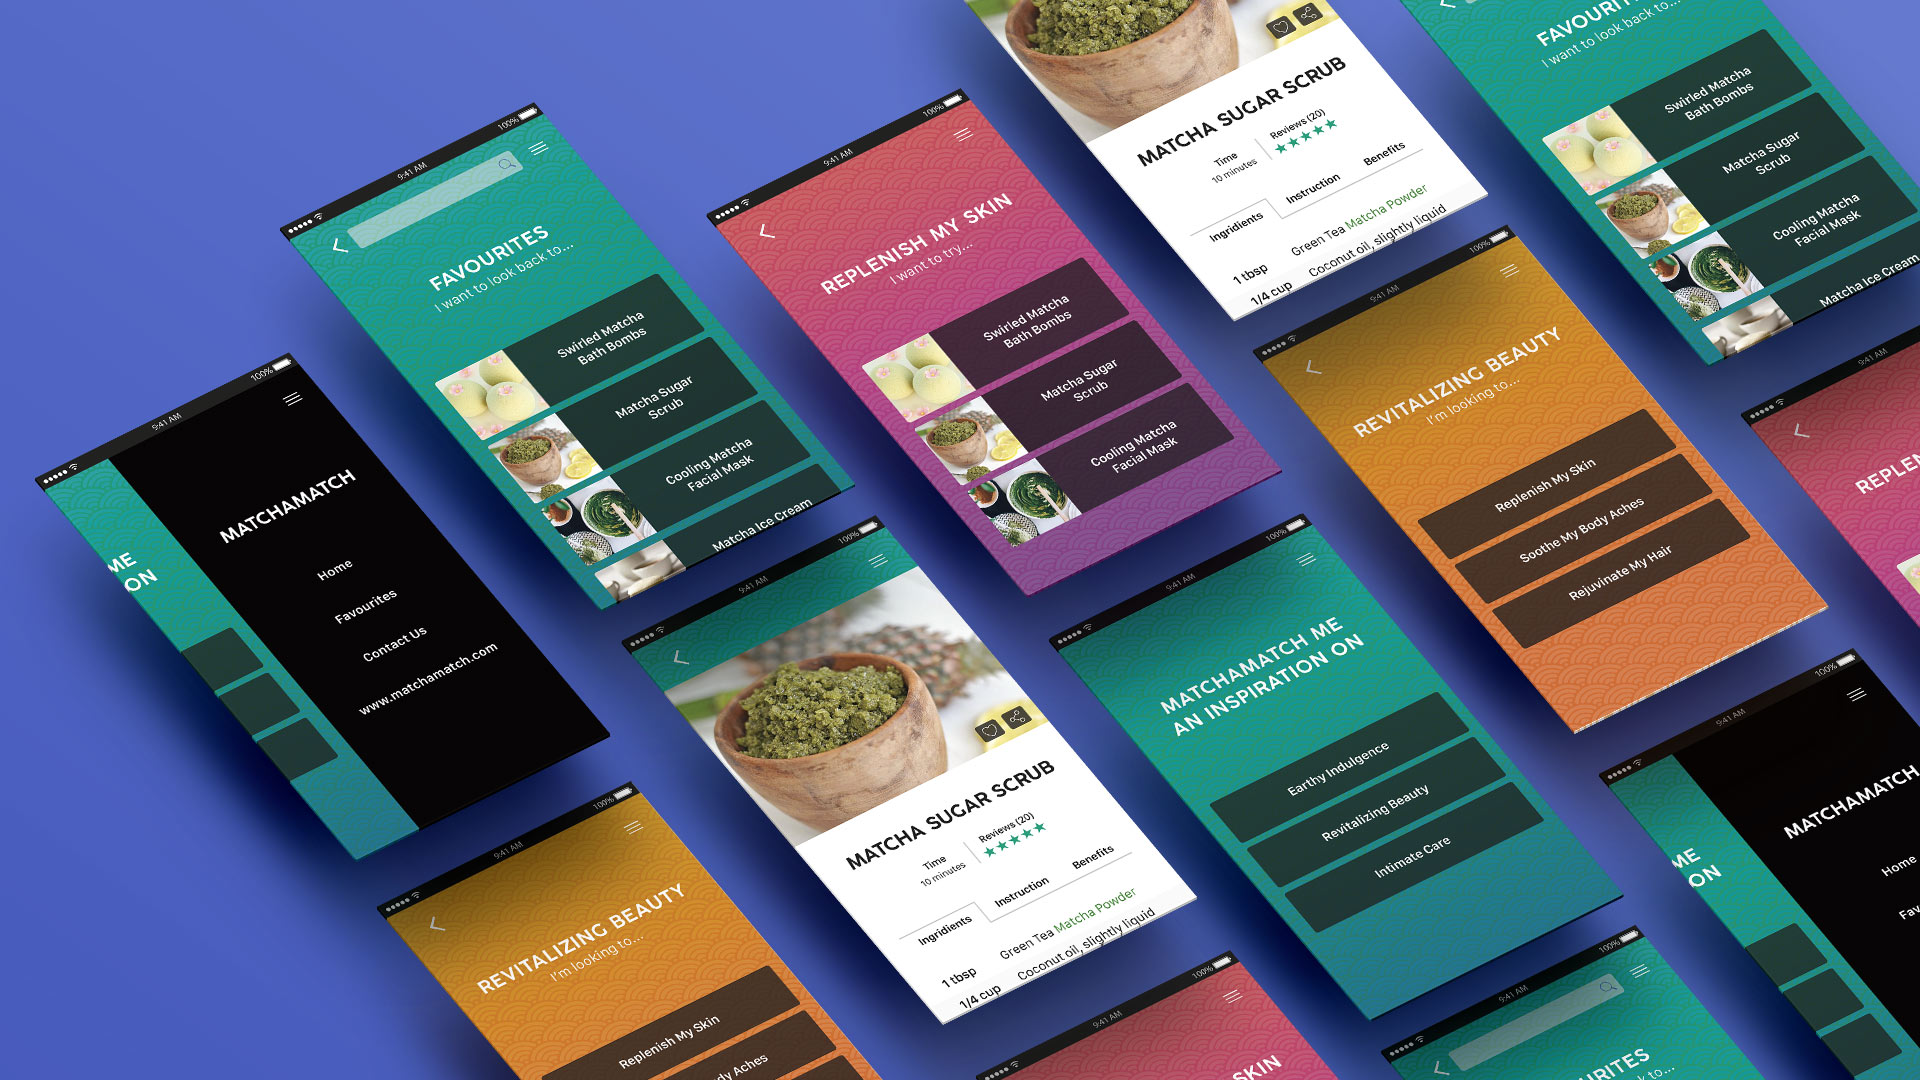 Annie Lee | Digital | MatchaMatch, an app encouraging health-conscious women to discover the diverse uses of matcha powder